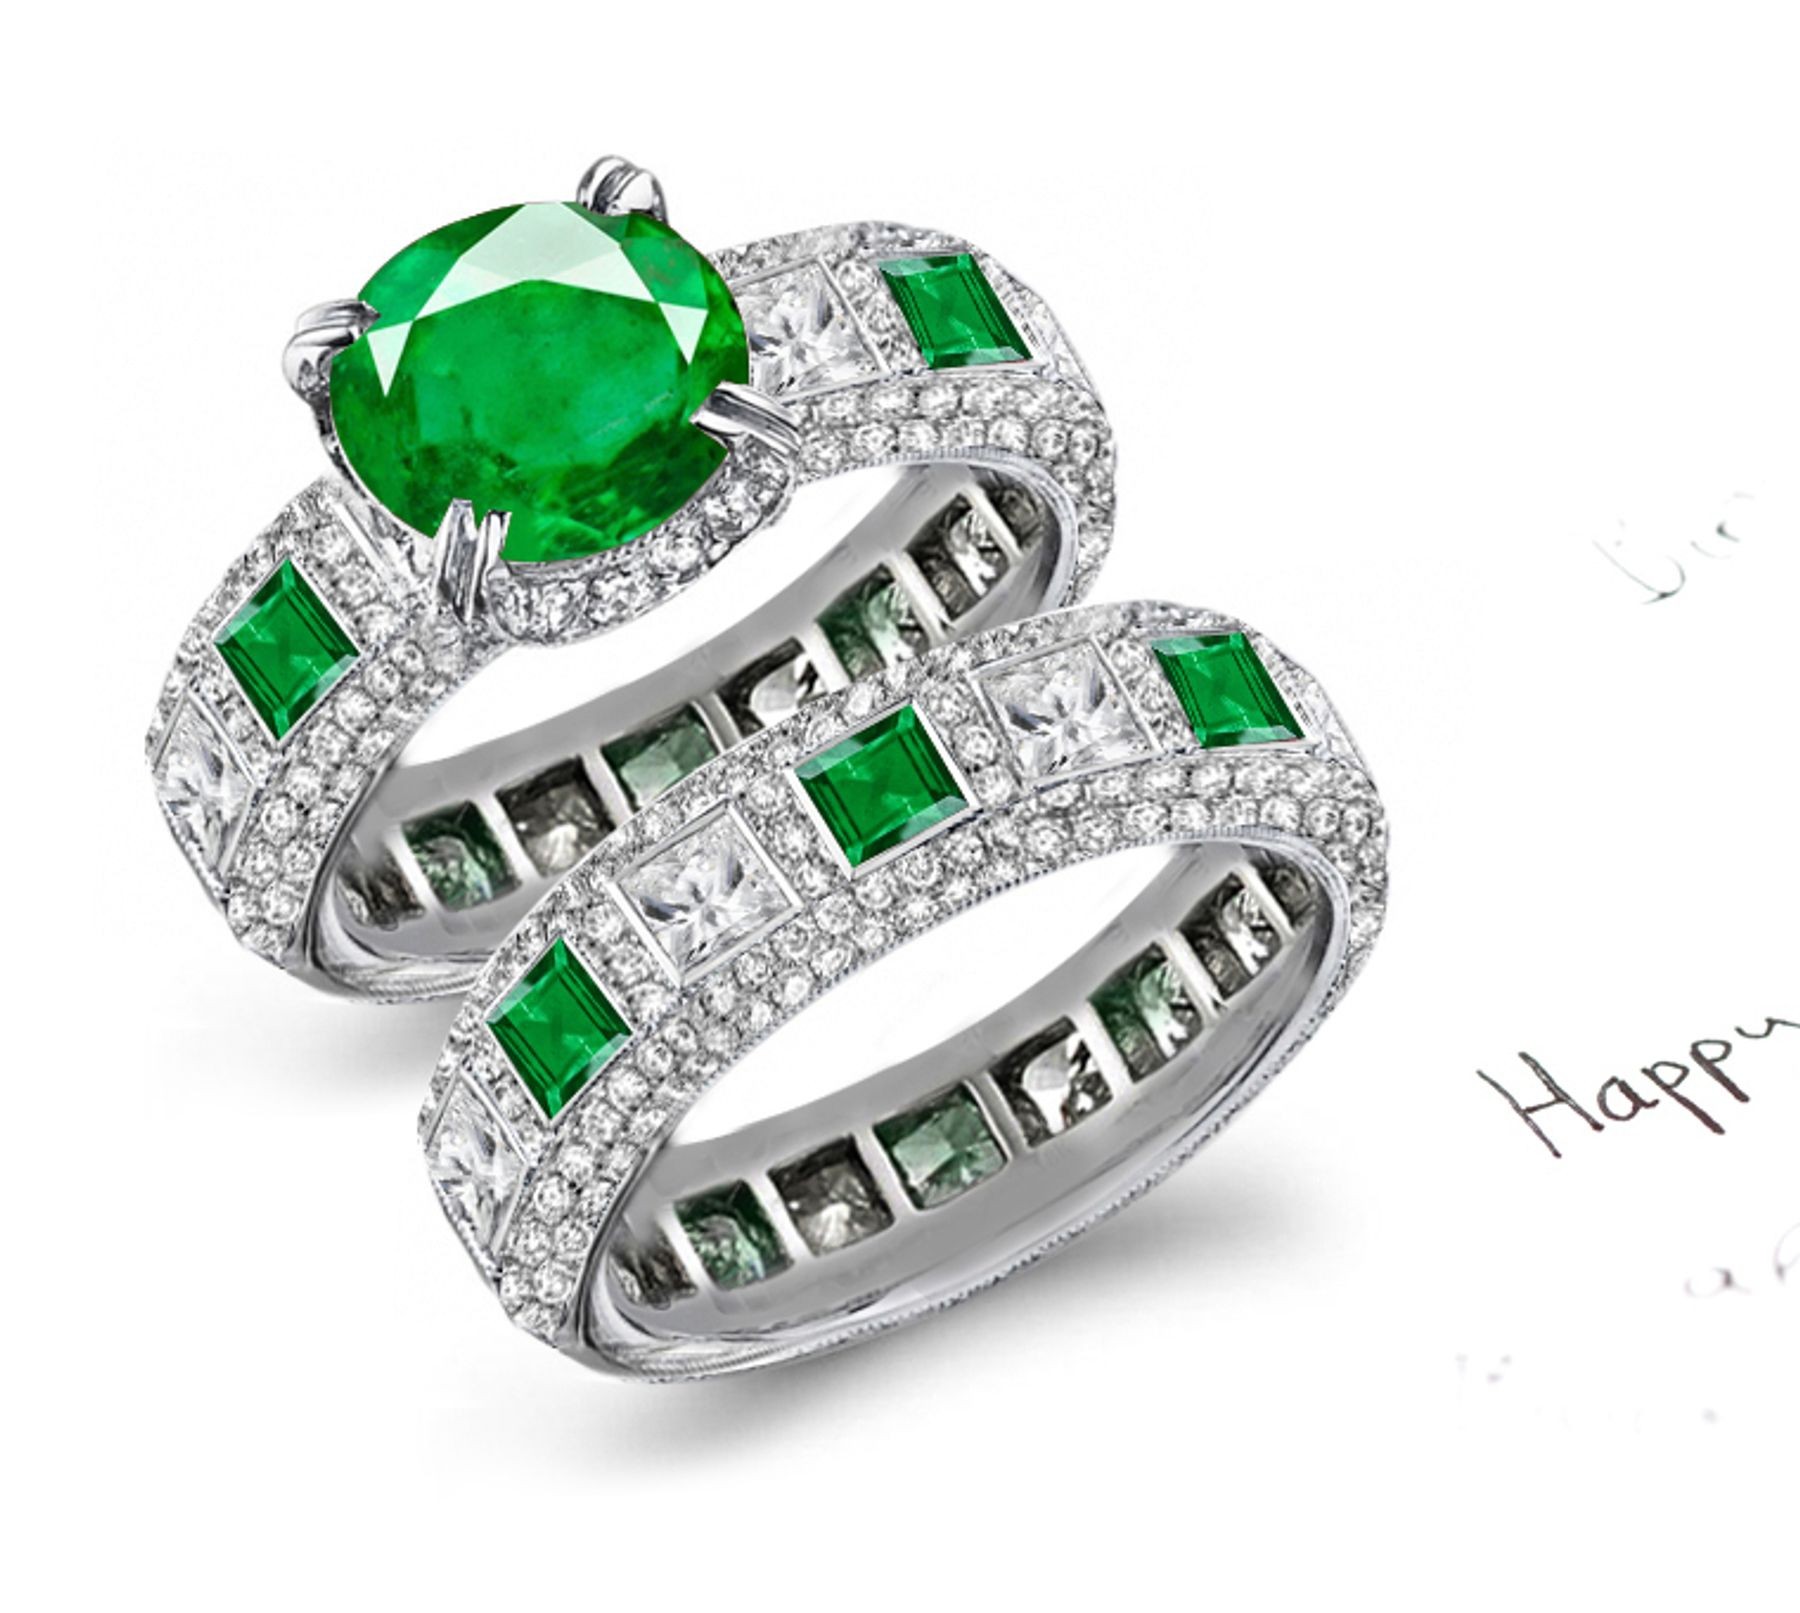 Unusual Advantages: View Not Only This Micropave Emerald & Diamond Cluster Ring & Band But This Princess Diamond Radiating Divine Gods Halo Bezels